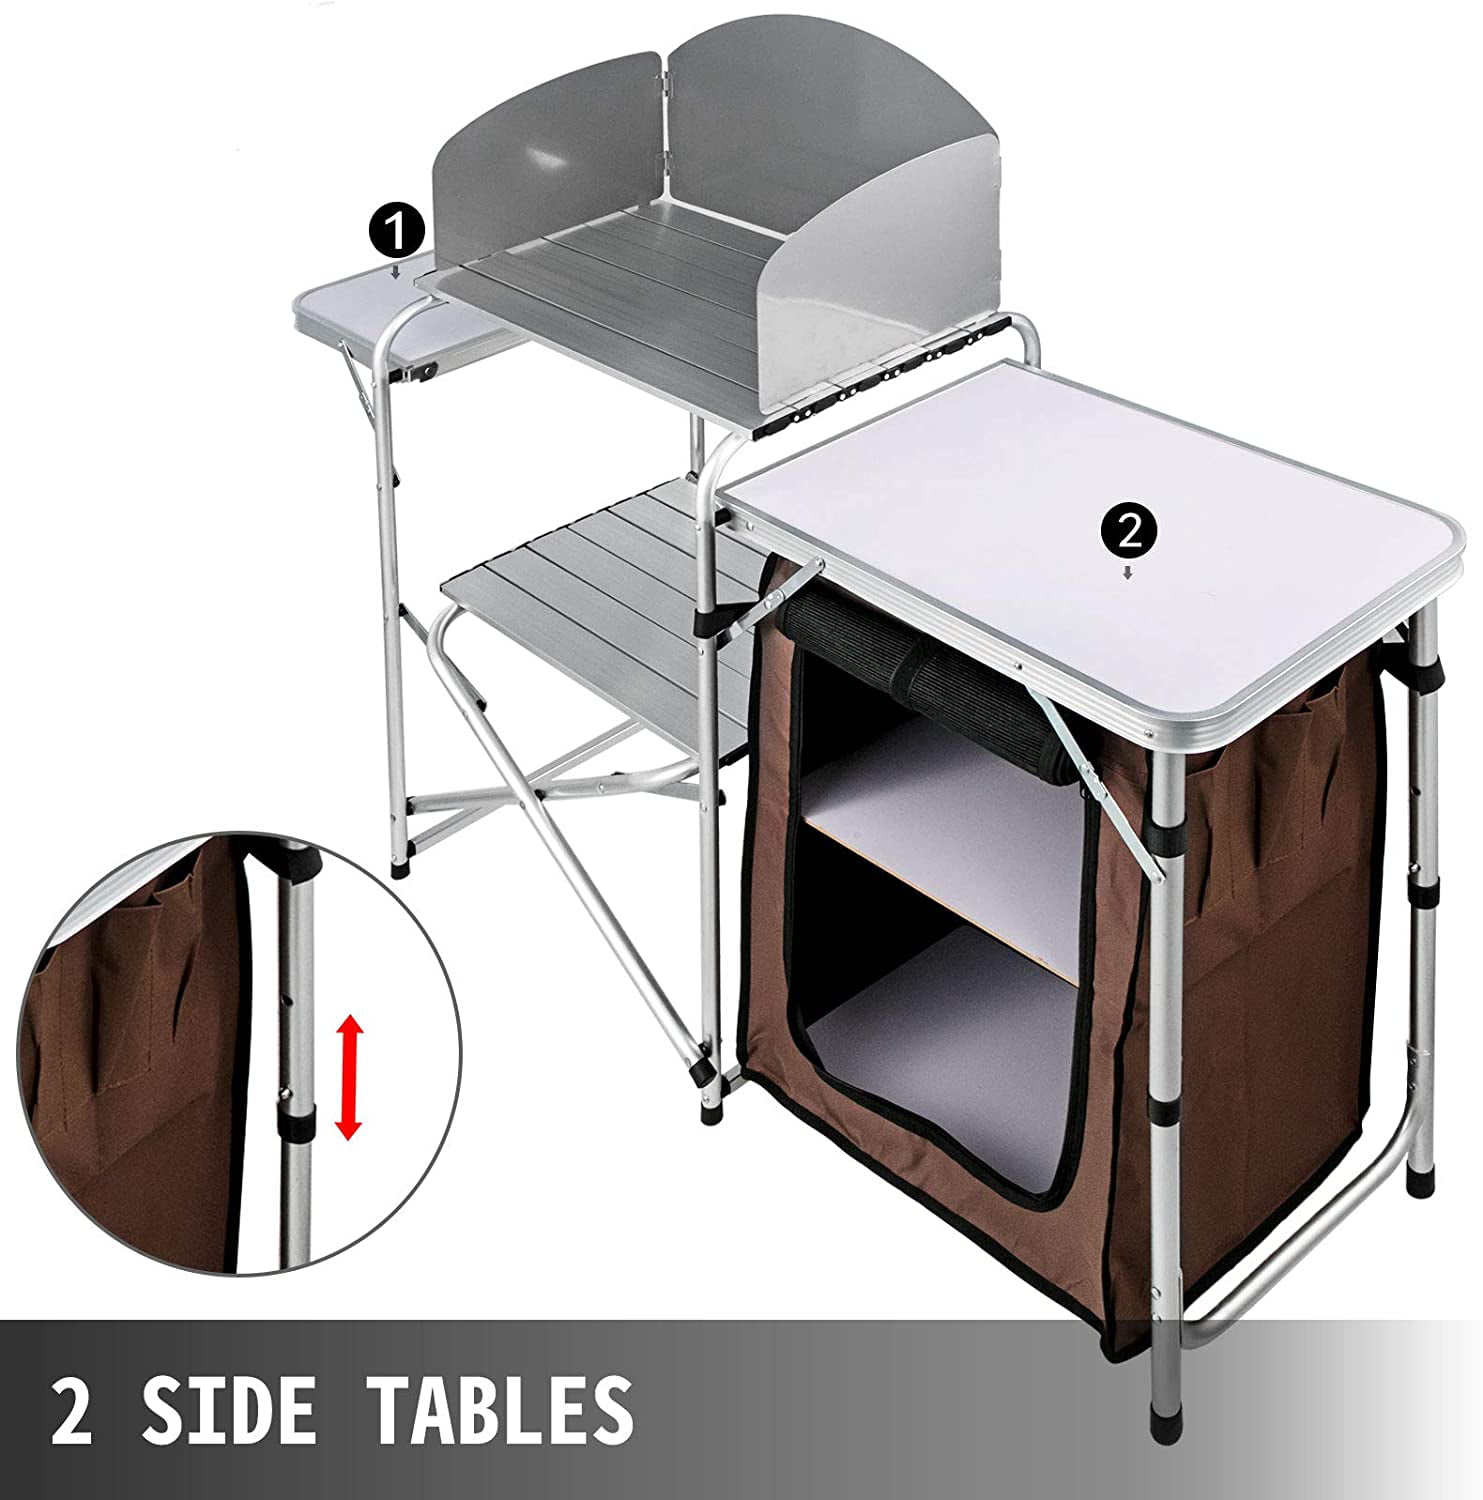 VBENLEM Outdoor Camp Kitchen 2-Tier Portable Camping Cook Table for Outdoor Activities Black Camping Kitchen Table 2 Side Tables with 3 Zippered Bag